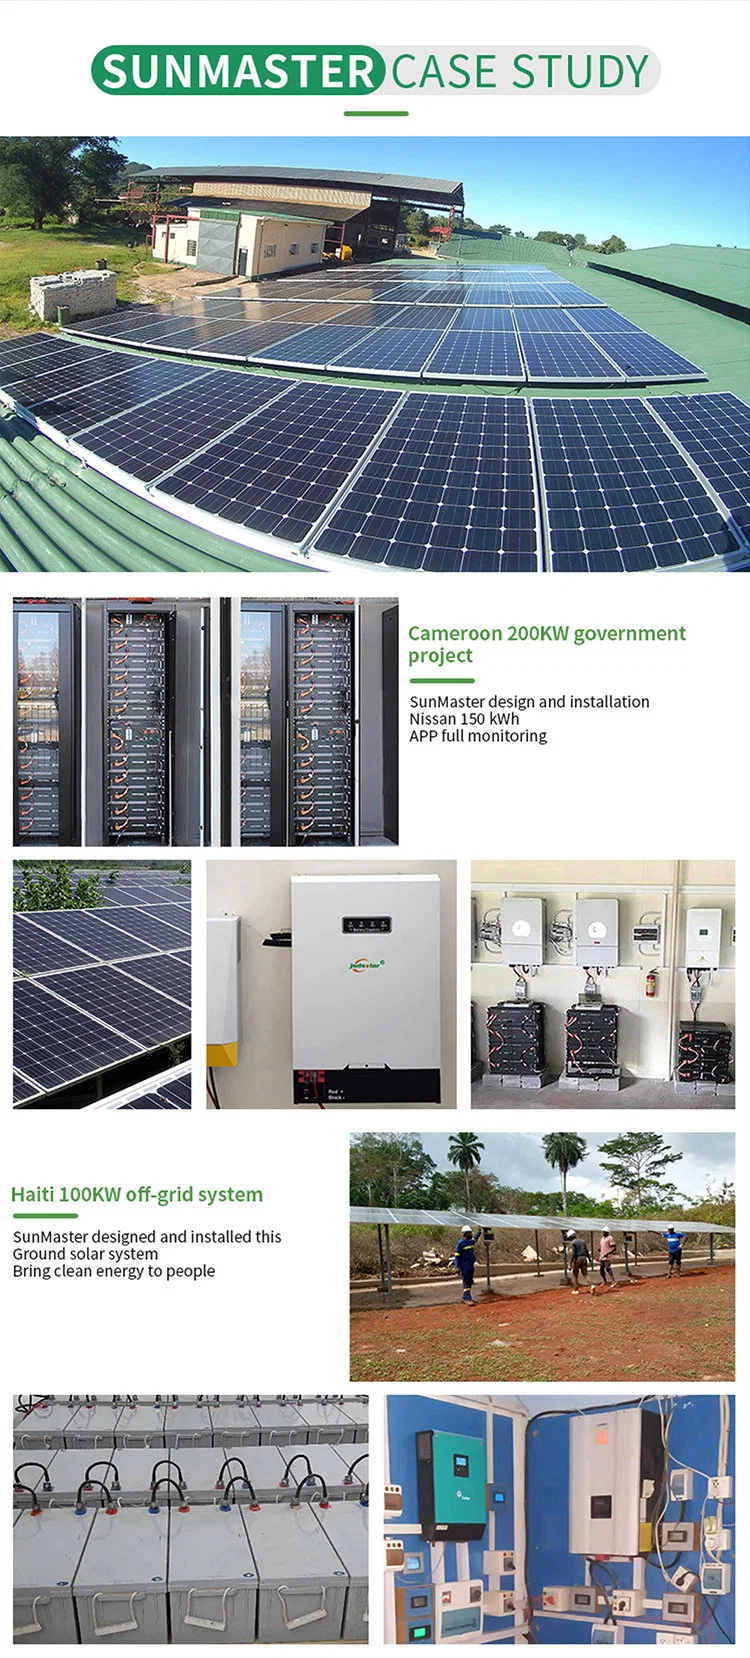 Private Label 1000W Power Station Power 15 to 20 Kw 10 AMP Solar Panel Commercial 10kw off Grid Portable Solar Generator